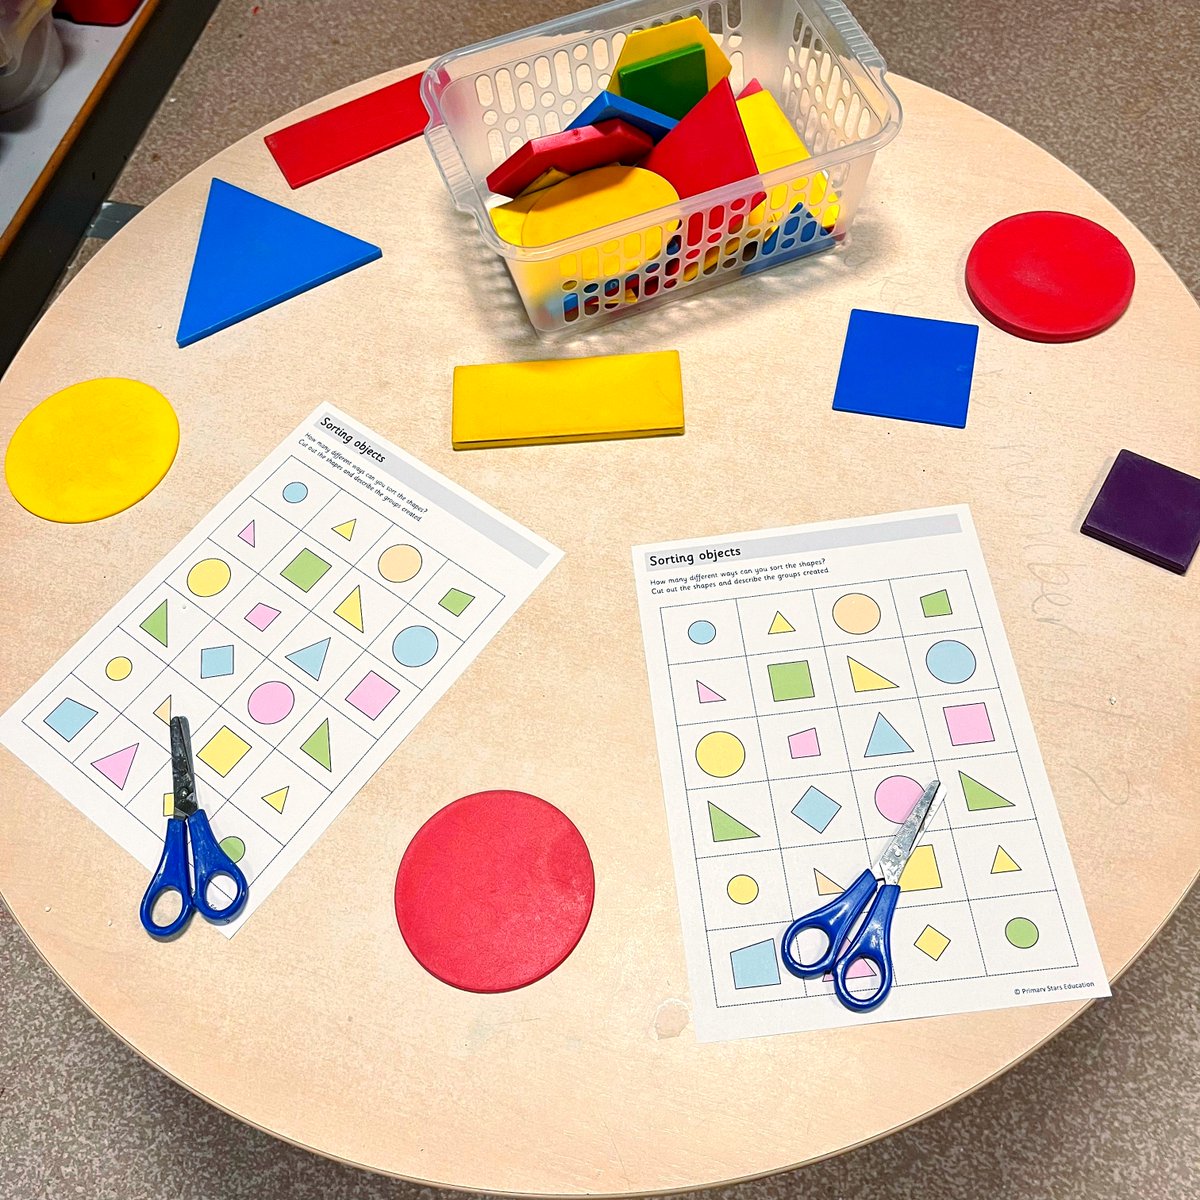 The opportunities are endless with this activity:
🟢 Sorting by properties
🟪 Playing snap
🔺 Ordering by size

What would you do? 

#teacherresources #learningresources #mathresources #mathsresources #mathbooks #iteachfirst #iteachkinder #ks1teacher #ks1 #year1teacher